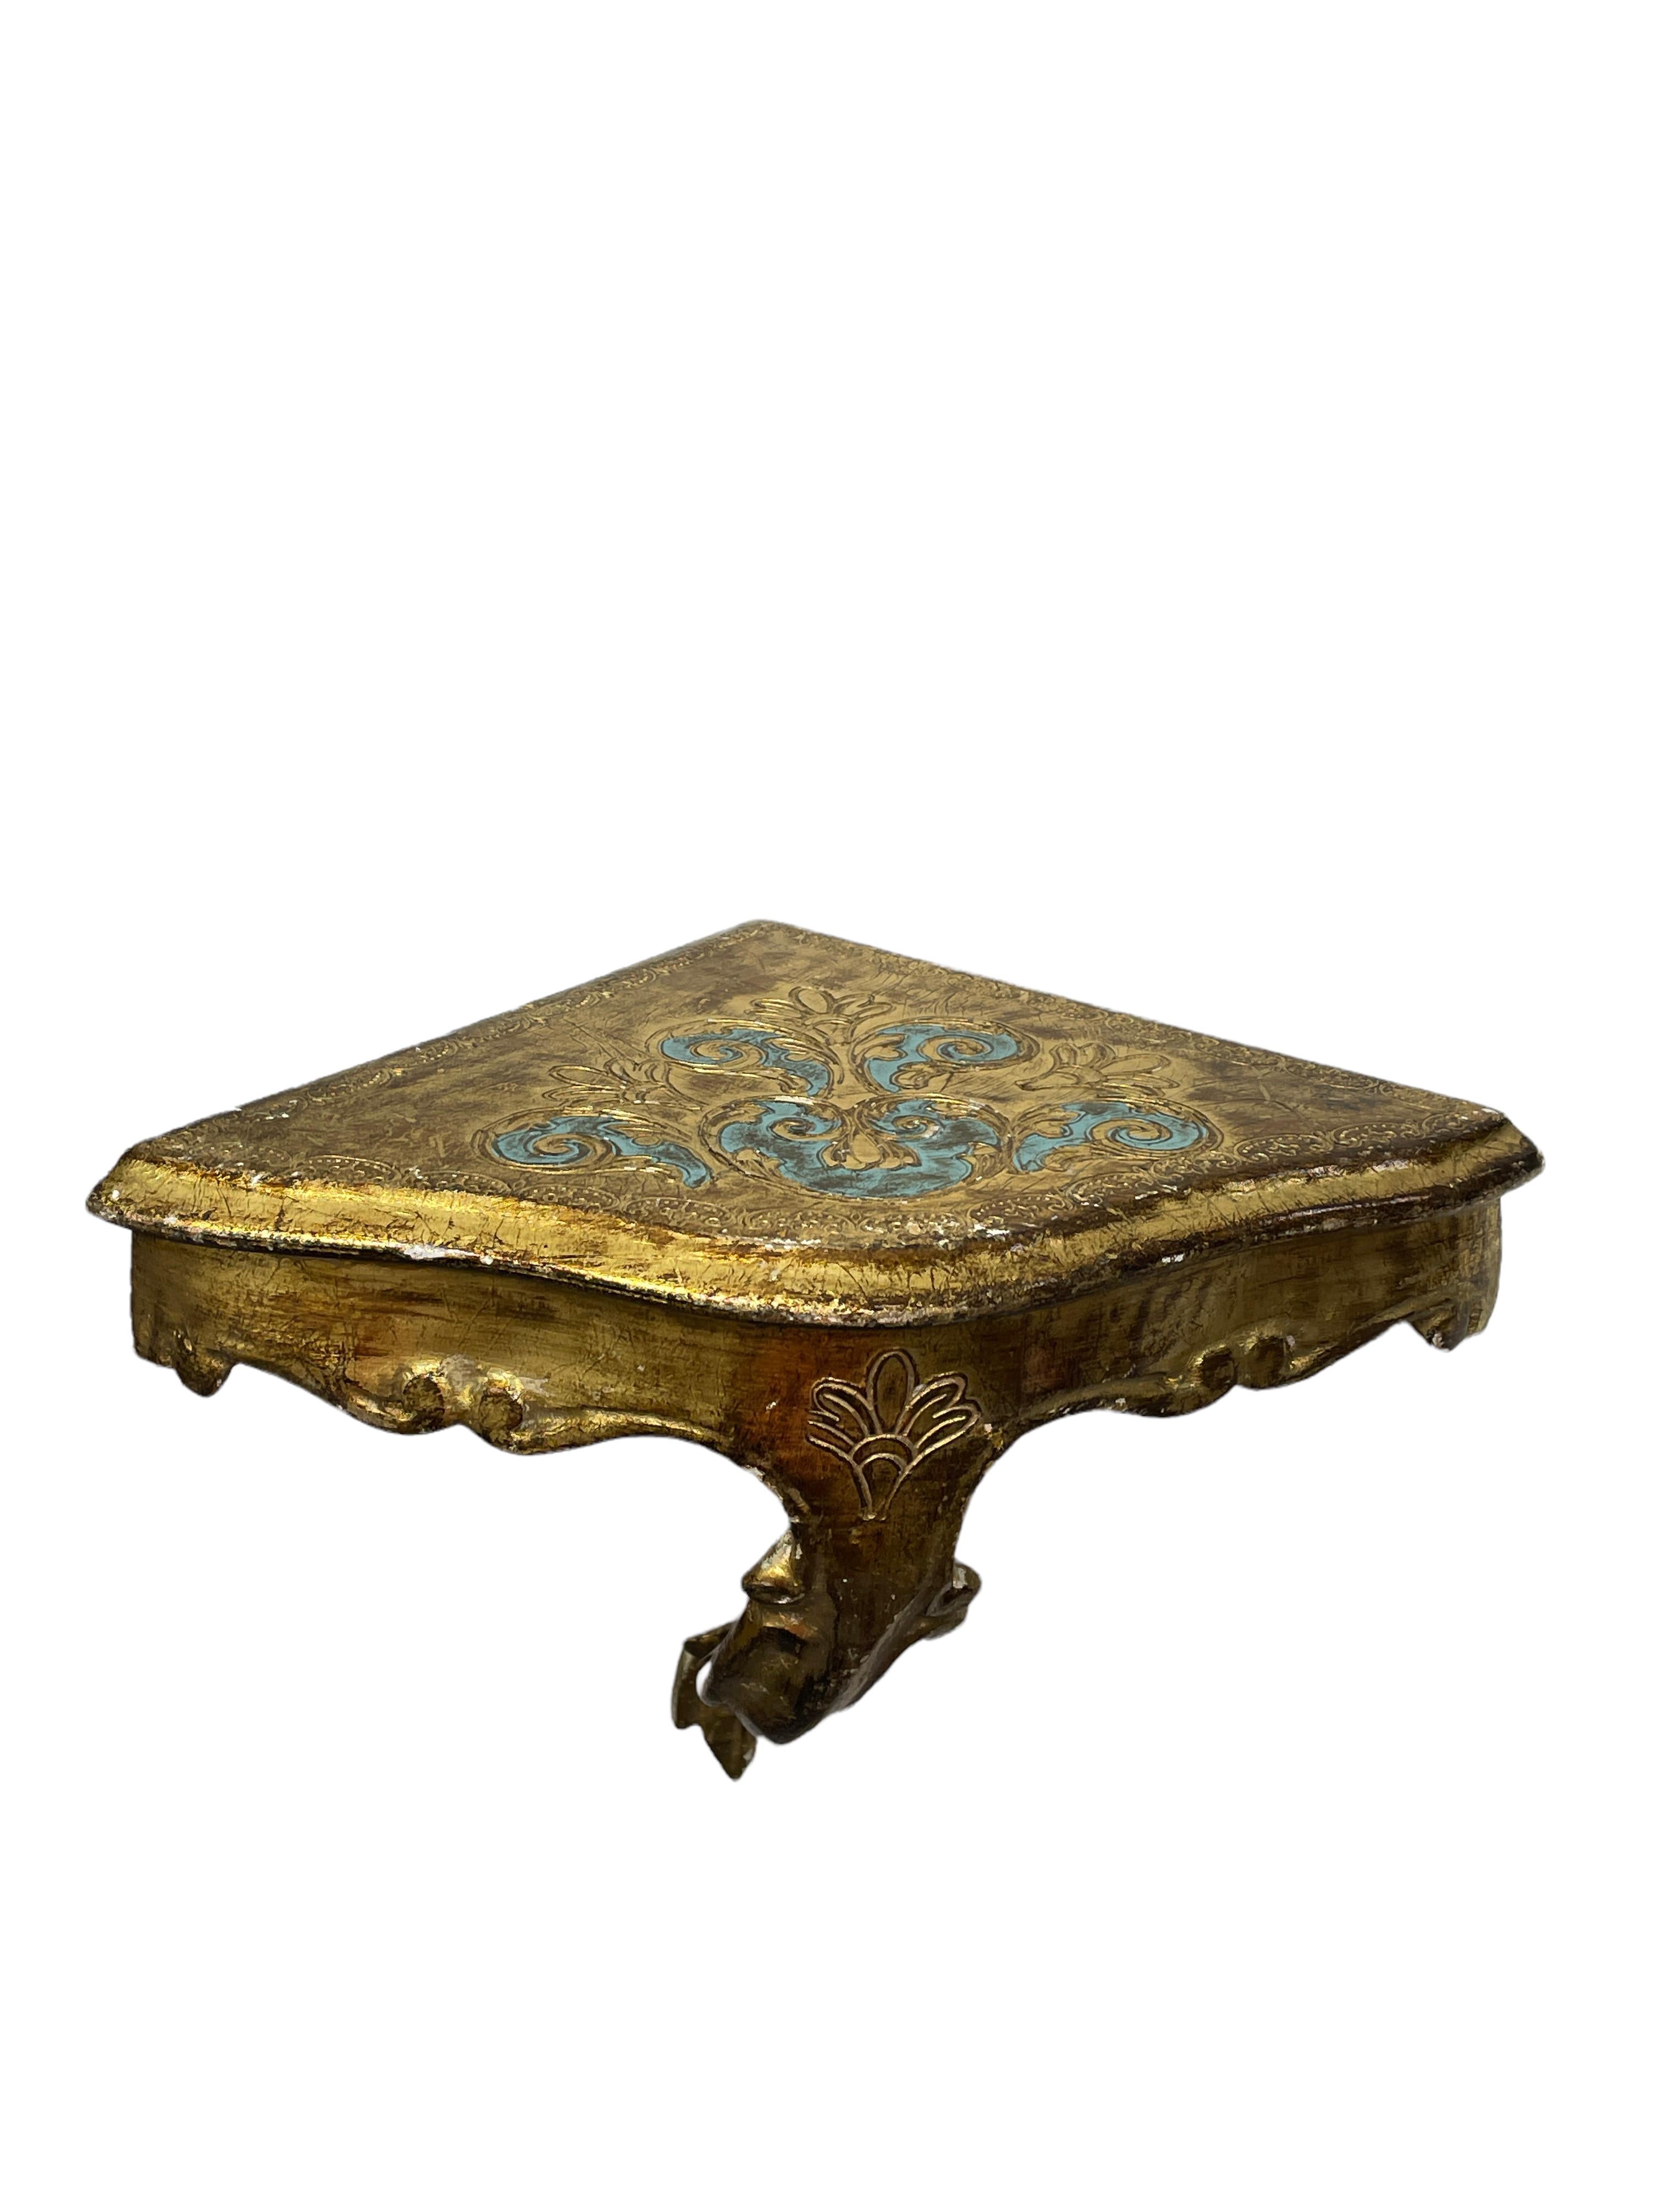 Offered is an absolutely stunning, 1960s Italian giltwood wall corner shelf or wall console. Minor patina and paint lost gives this piece a classy statement. Made of hand carved wood and gold plated. A nice shelf to present a statuette or a